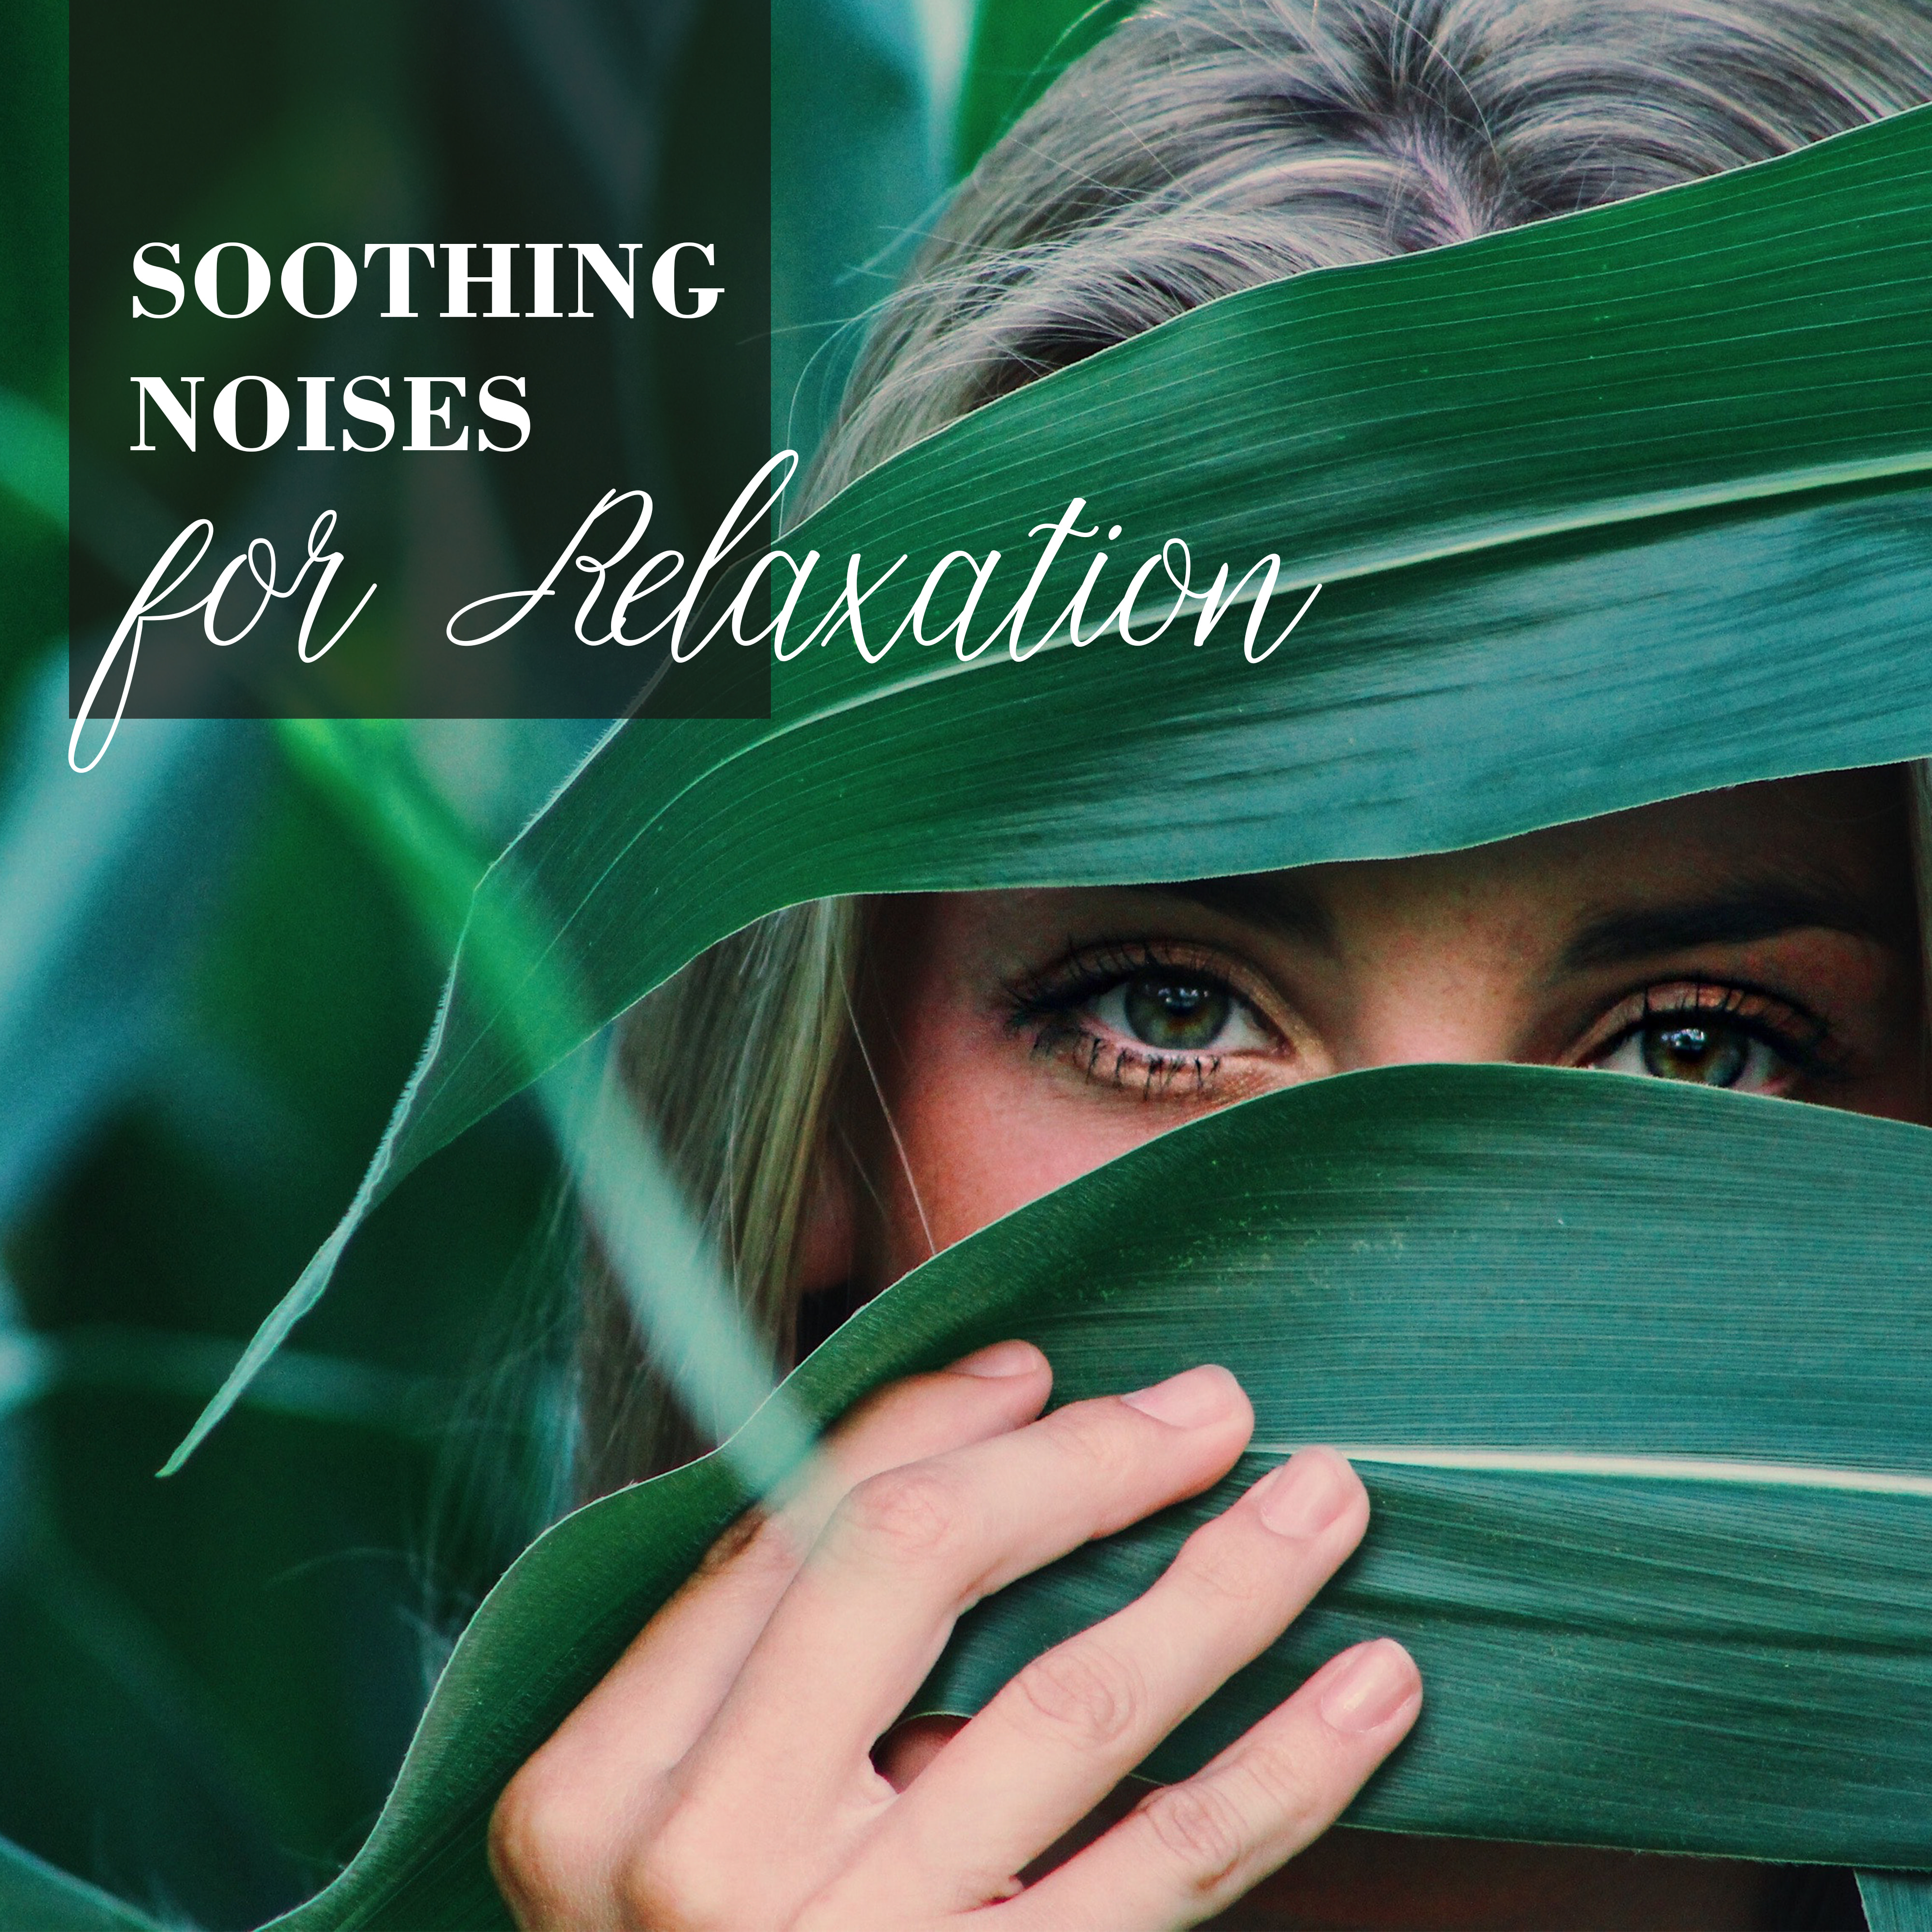 Soothing Noises for Relaxation